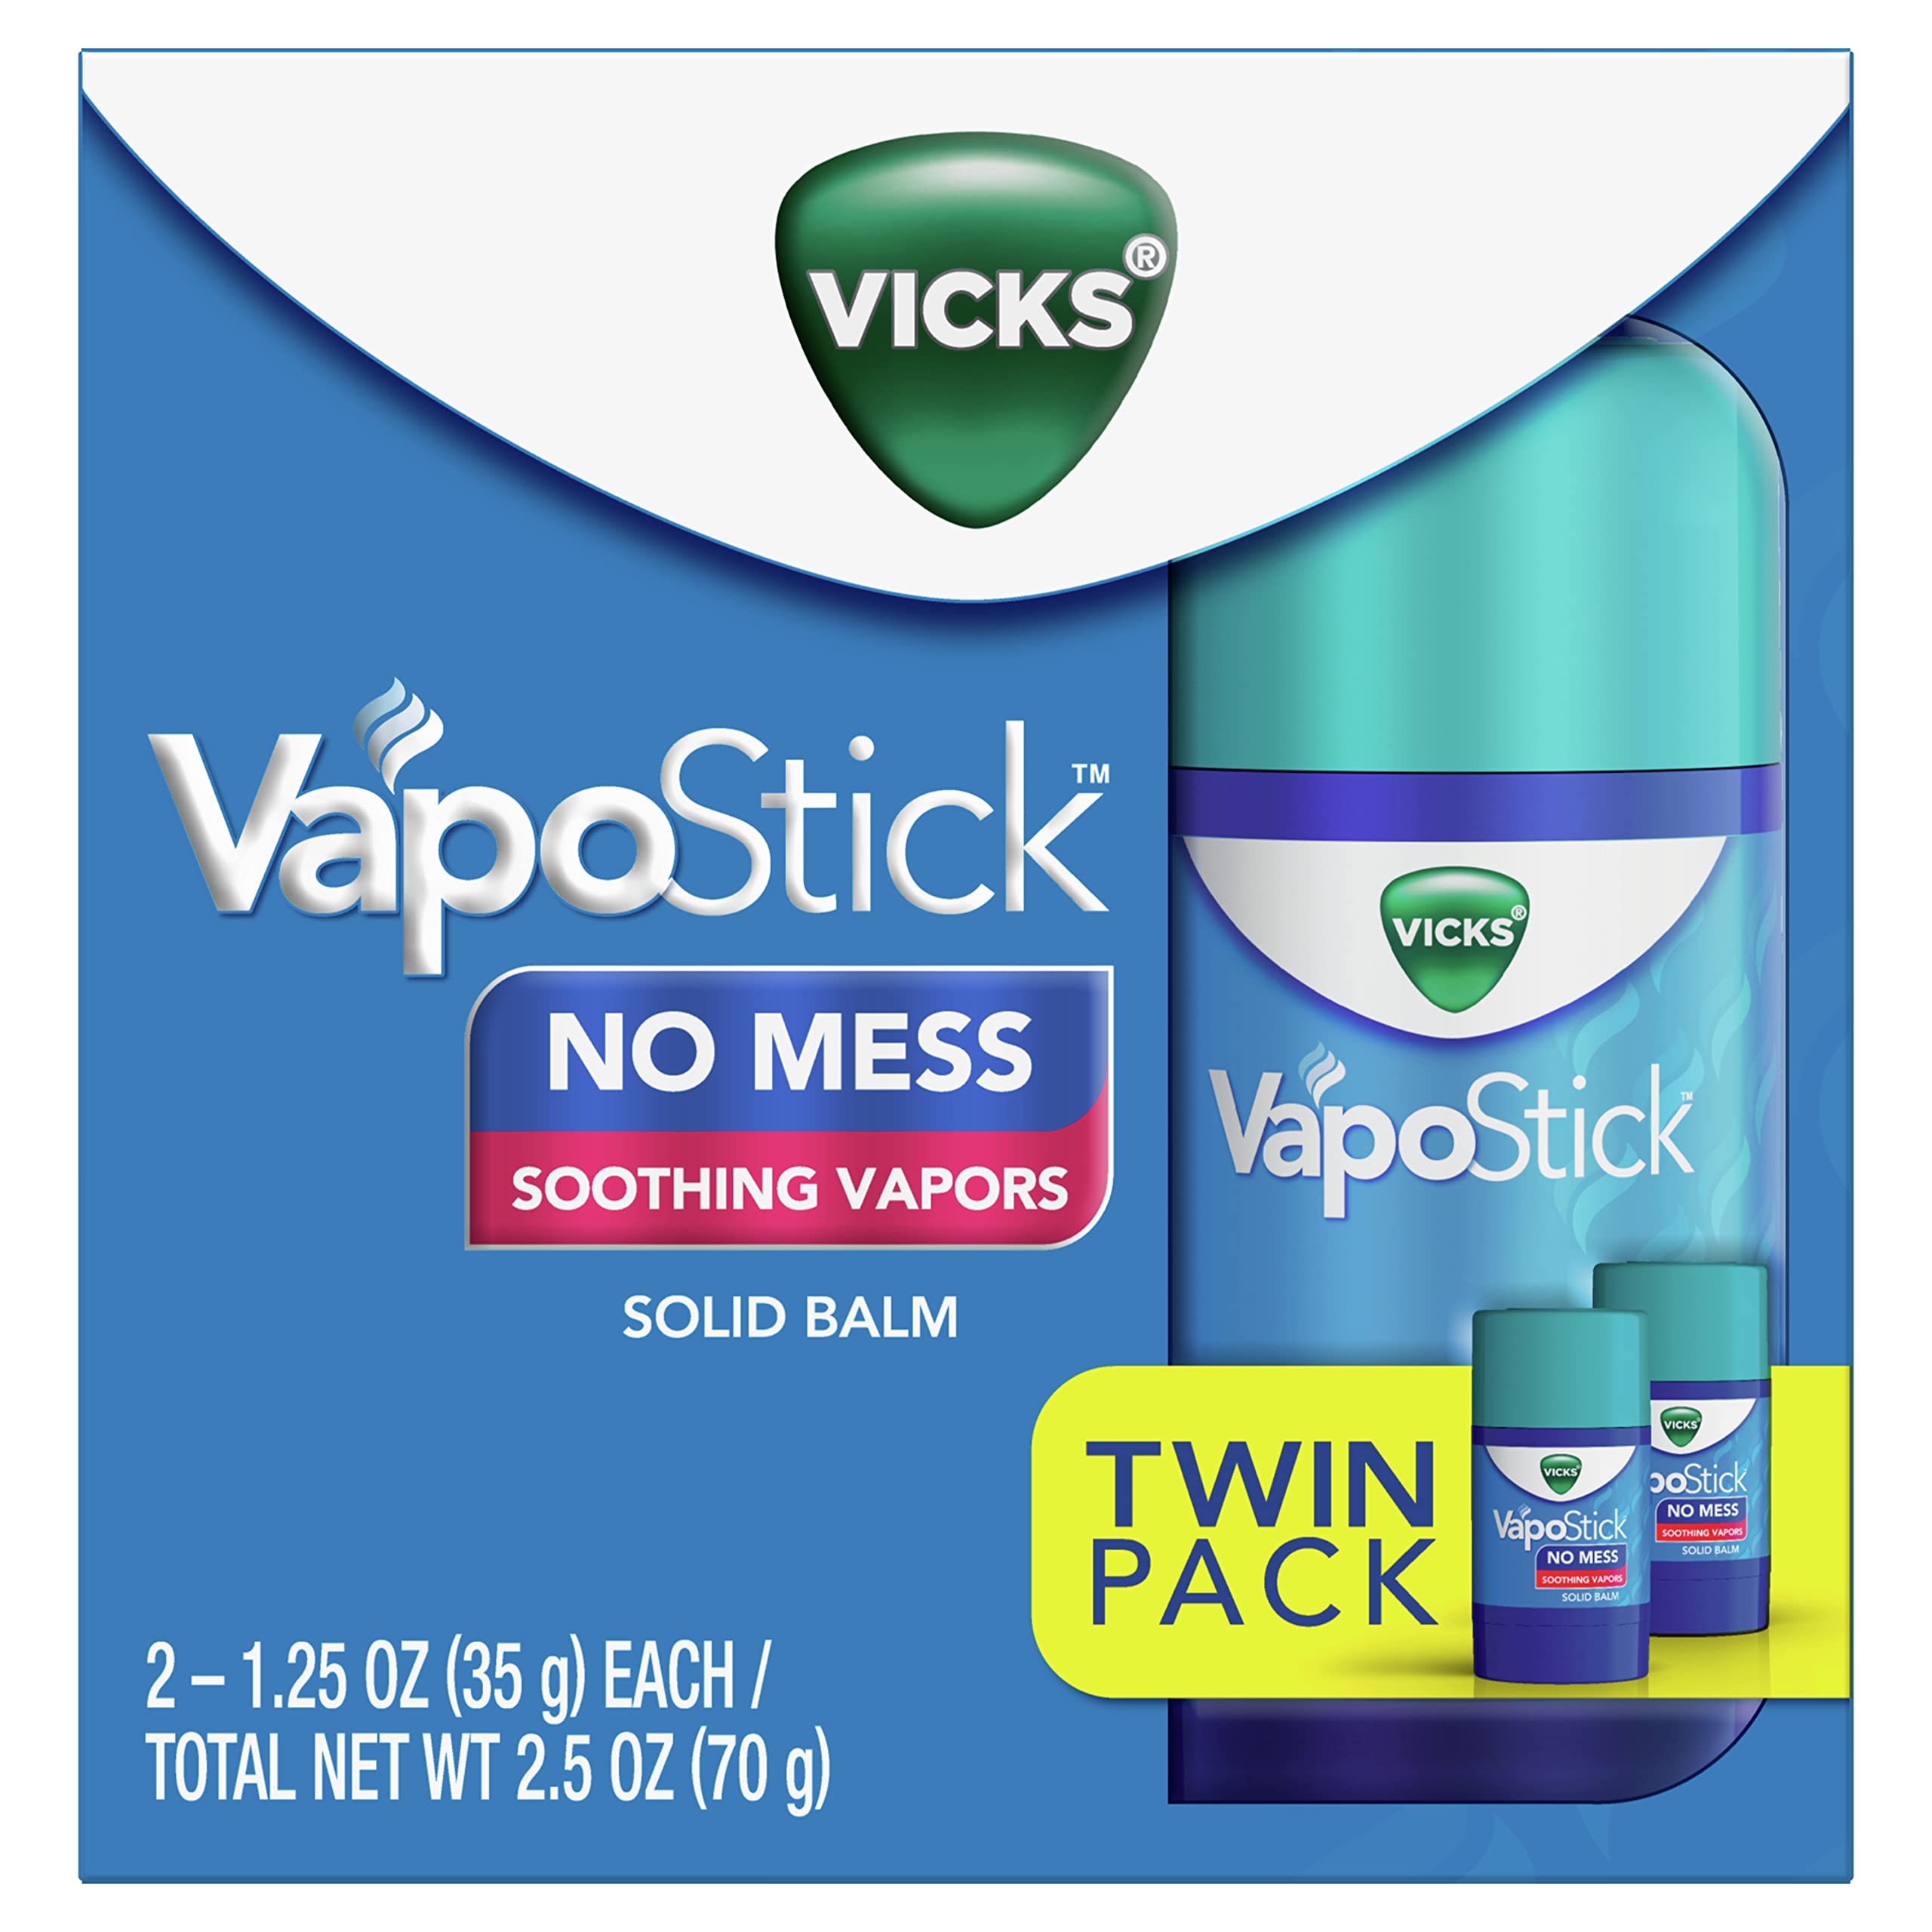 Vicks VapoStick,Solid Balm,No Mess,Comforting Non-Medicated Vicks Vapors,Easy-To-Use No-Touch Applicator,Quick Dry,Lightweight Skin Feel,From The Makers of Vicks VapoRub,1.25oz x 2 (Twin Pack)